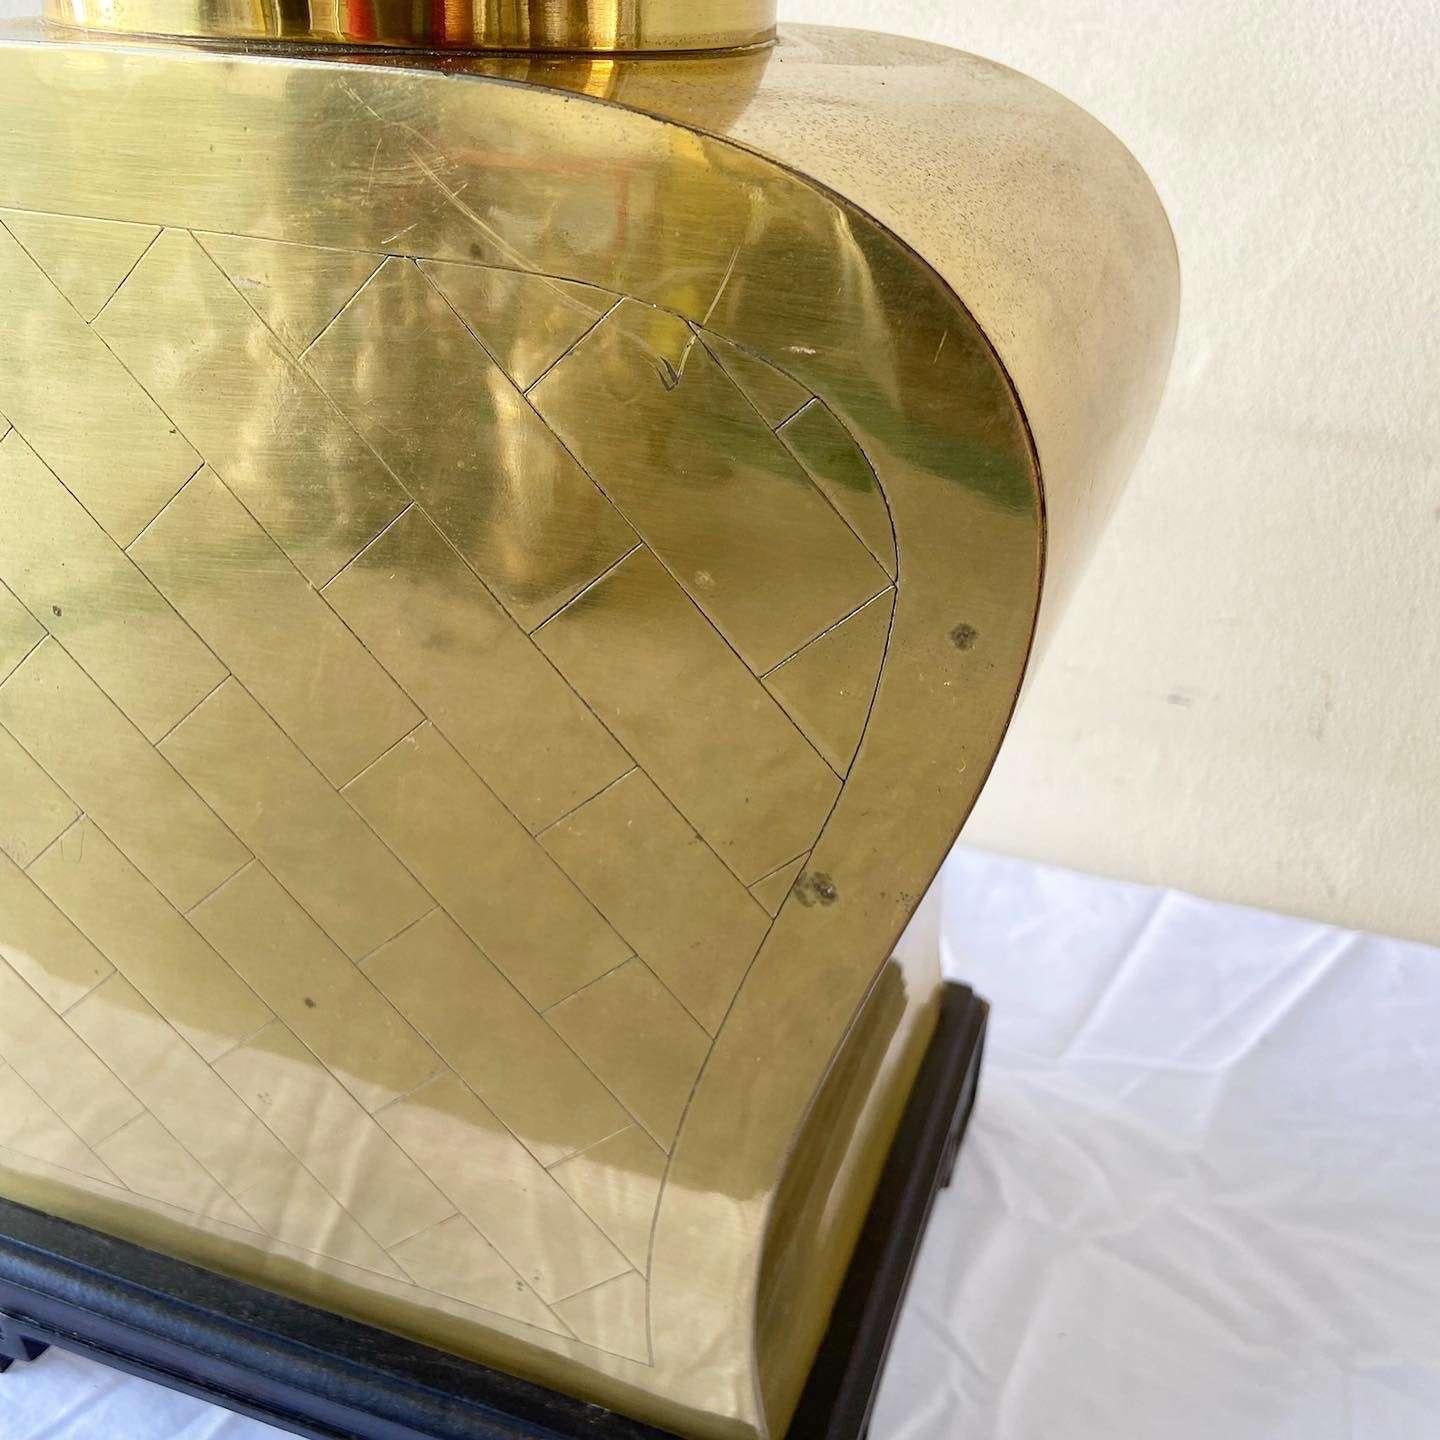 Exceptional vintage golden table lamp. Features a sculpted body on a wooden base.
